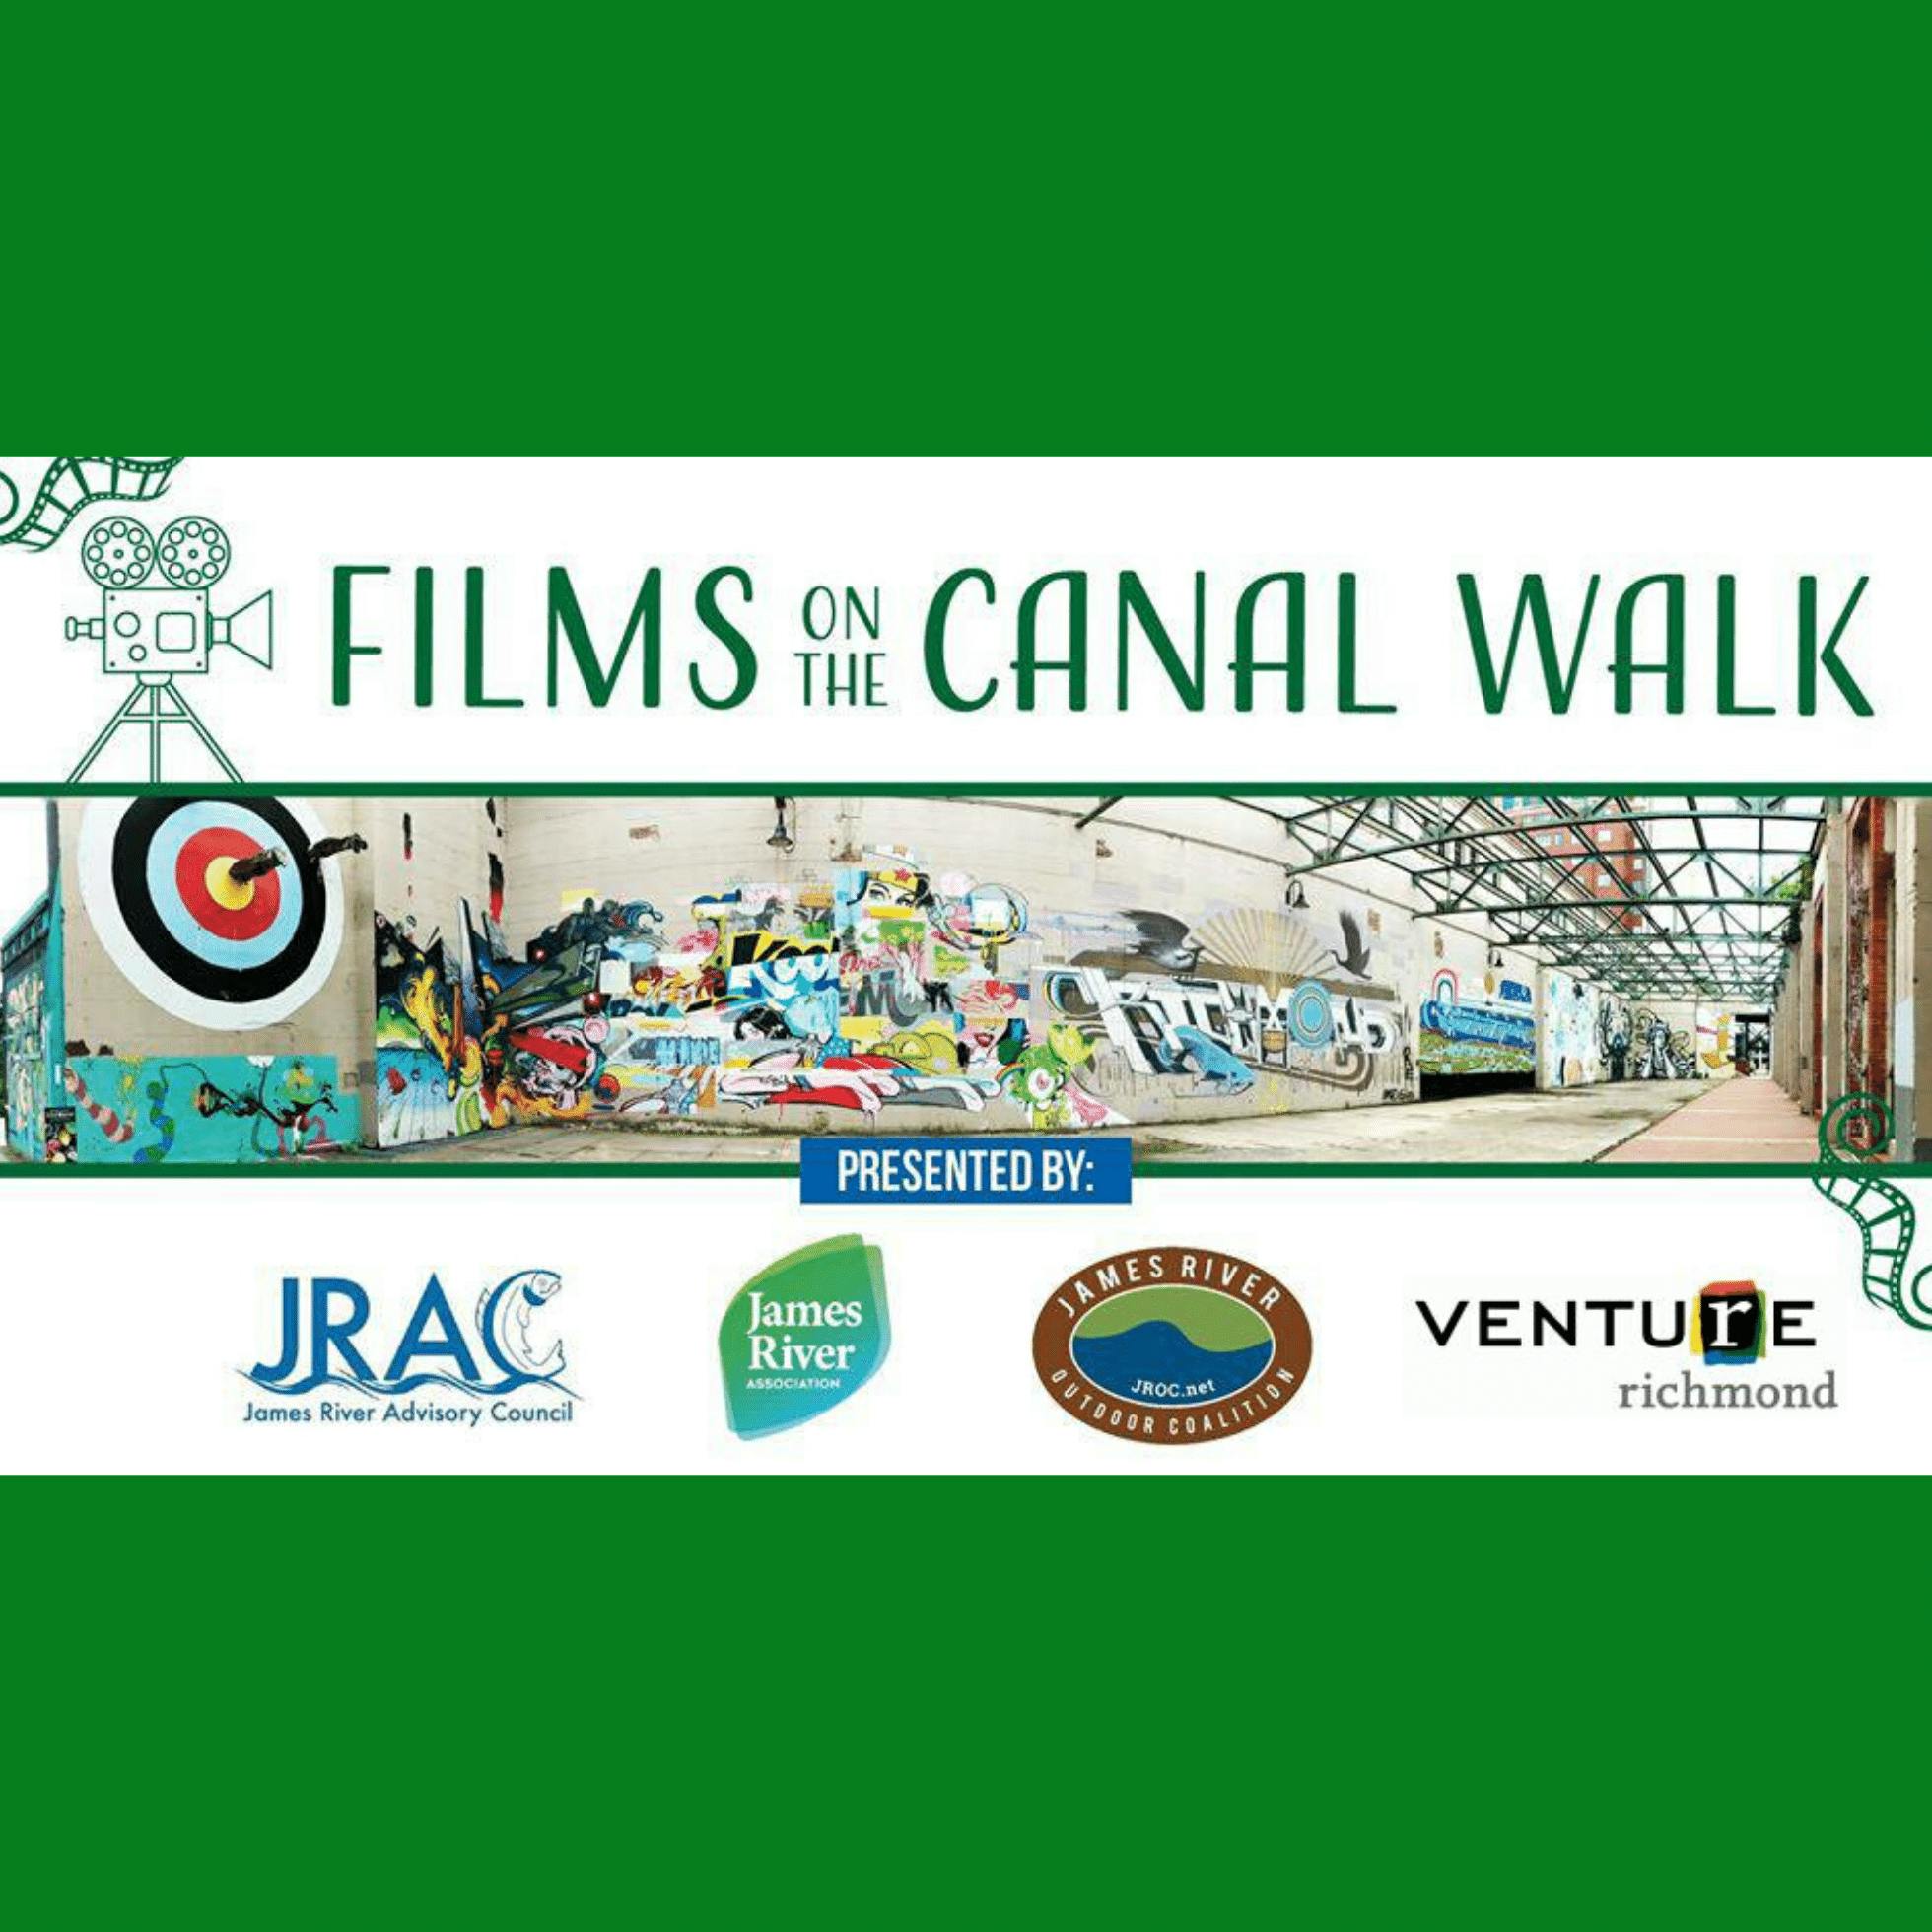 Films on the Canal Walk Film Submission Deadline